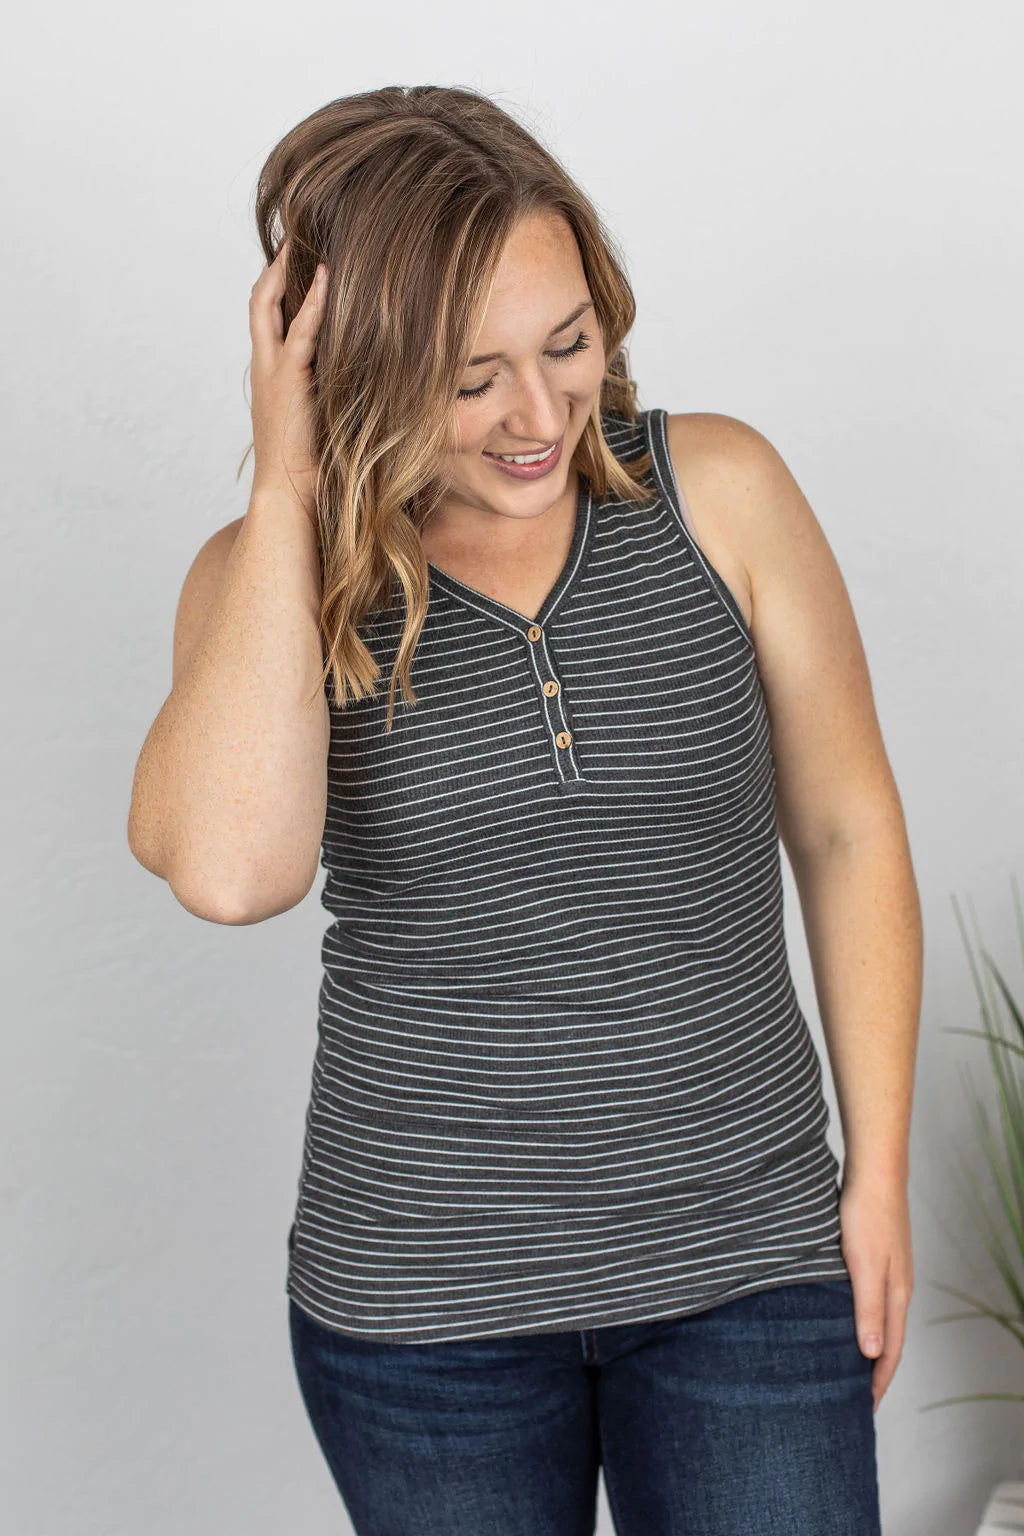 Spring Stroll Henley Tank - Charcoal Stripes